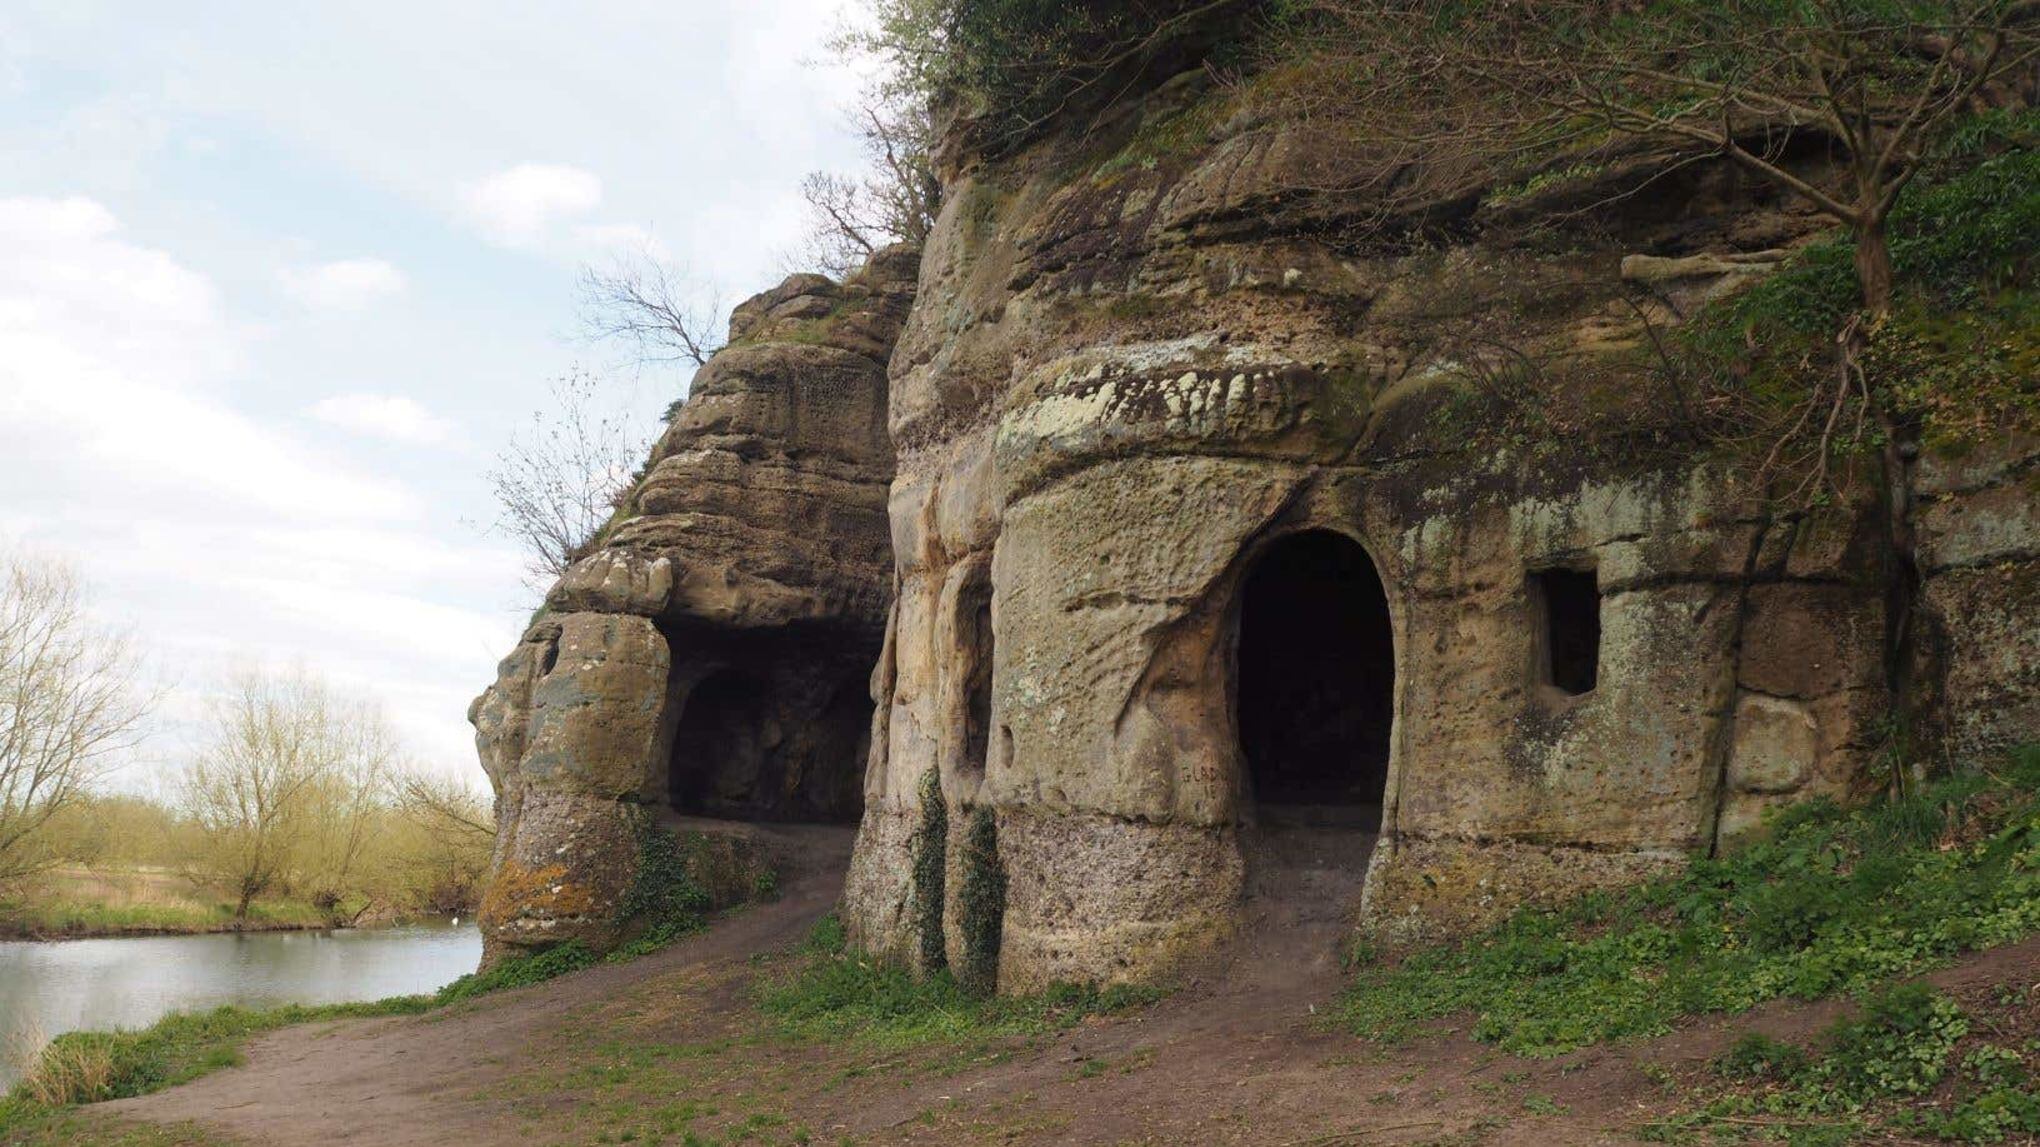 The caves, which were cut out of the soft sandstone rock, had long been considered to be 18th century follies.